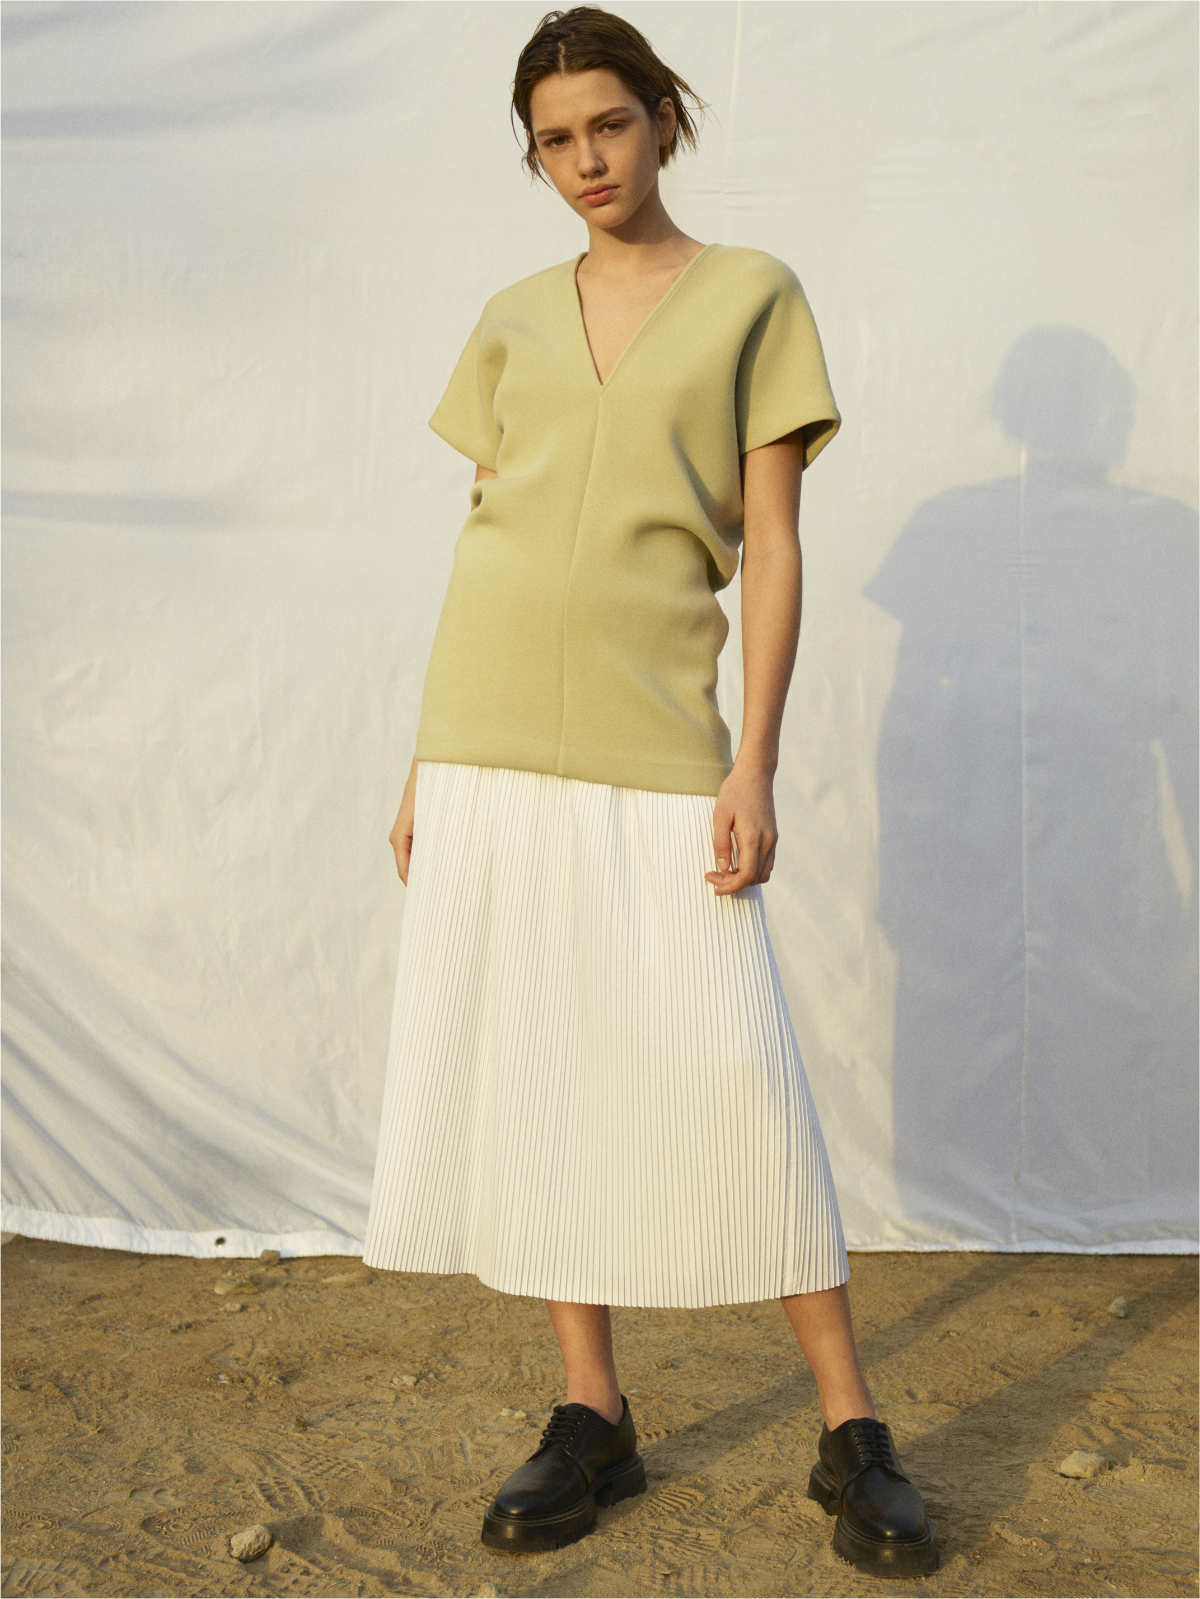 COS Presents Its Vision For Spring Summer 2021 And Launches Circular ...